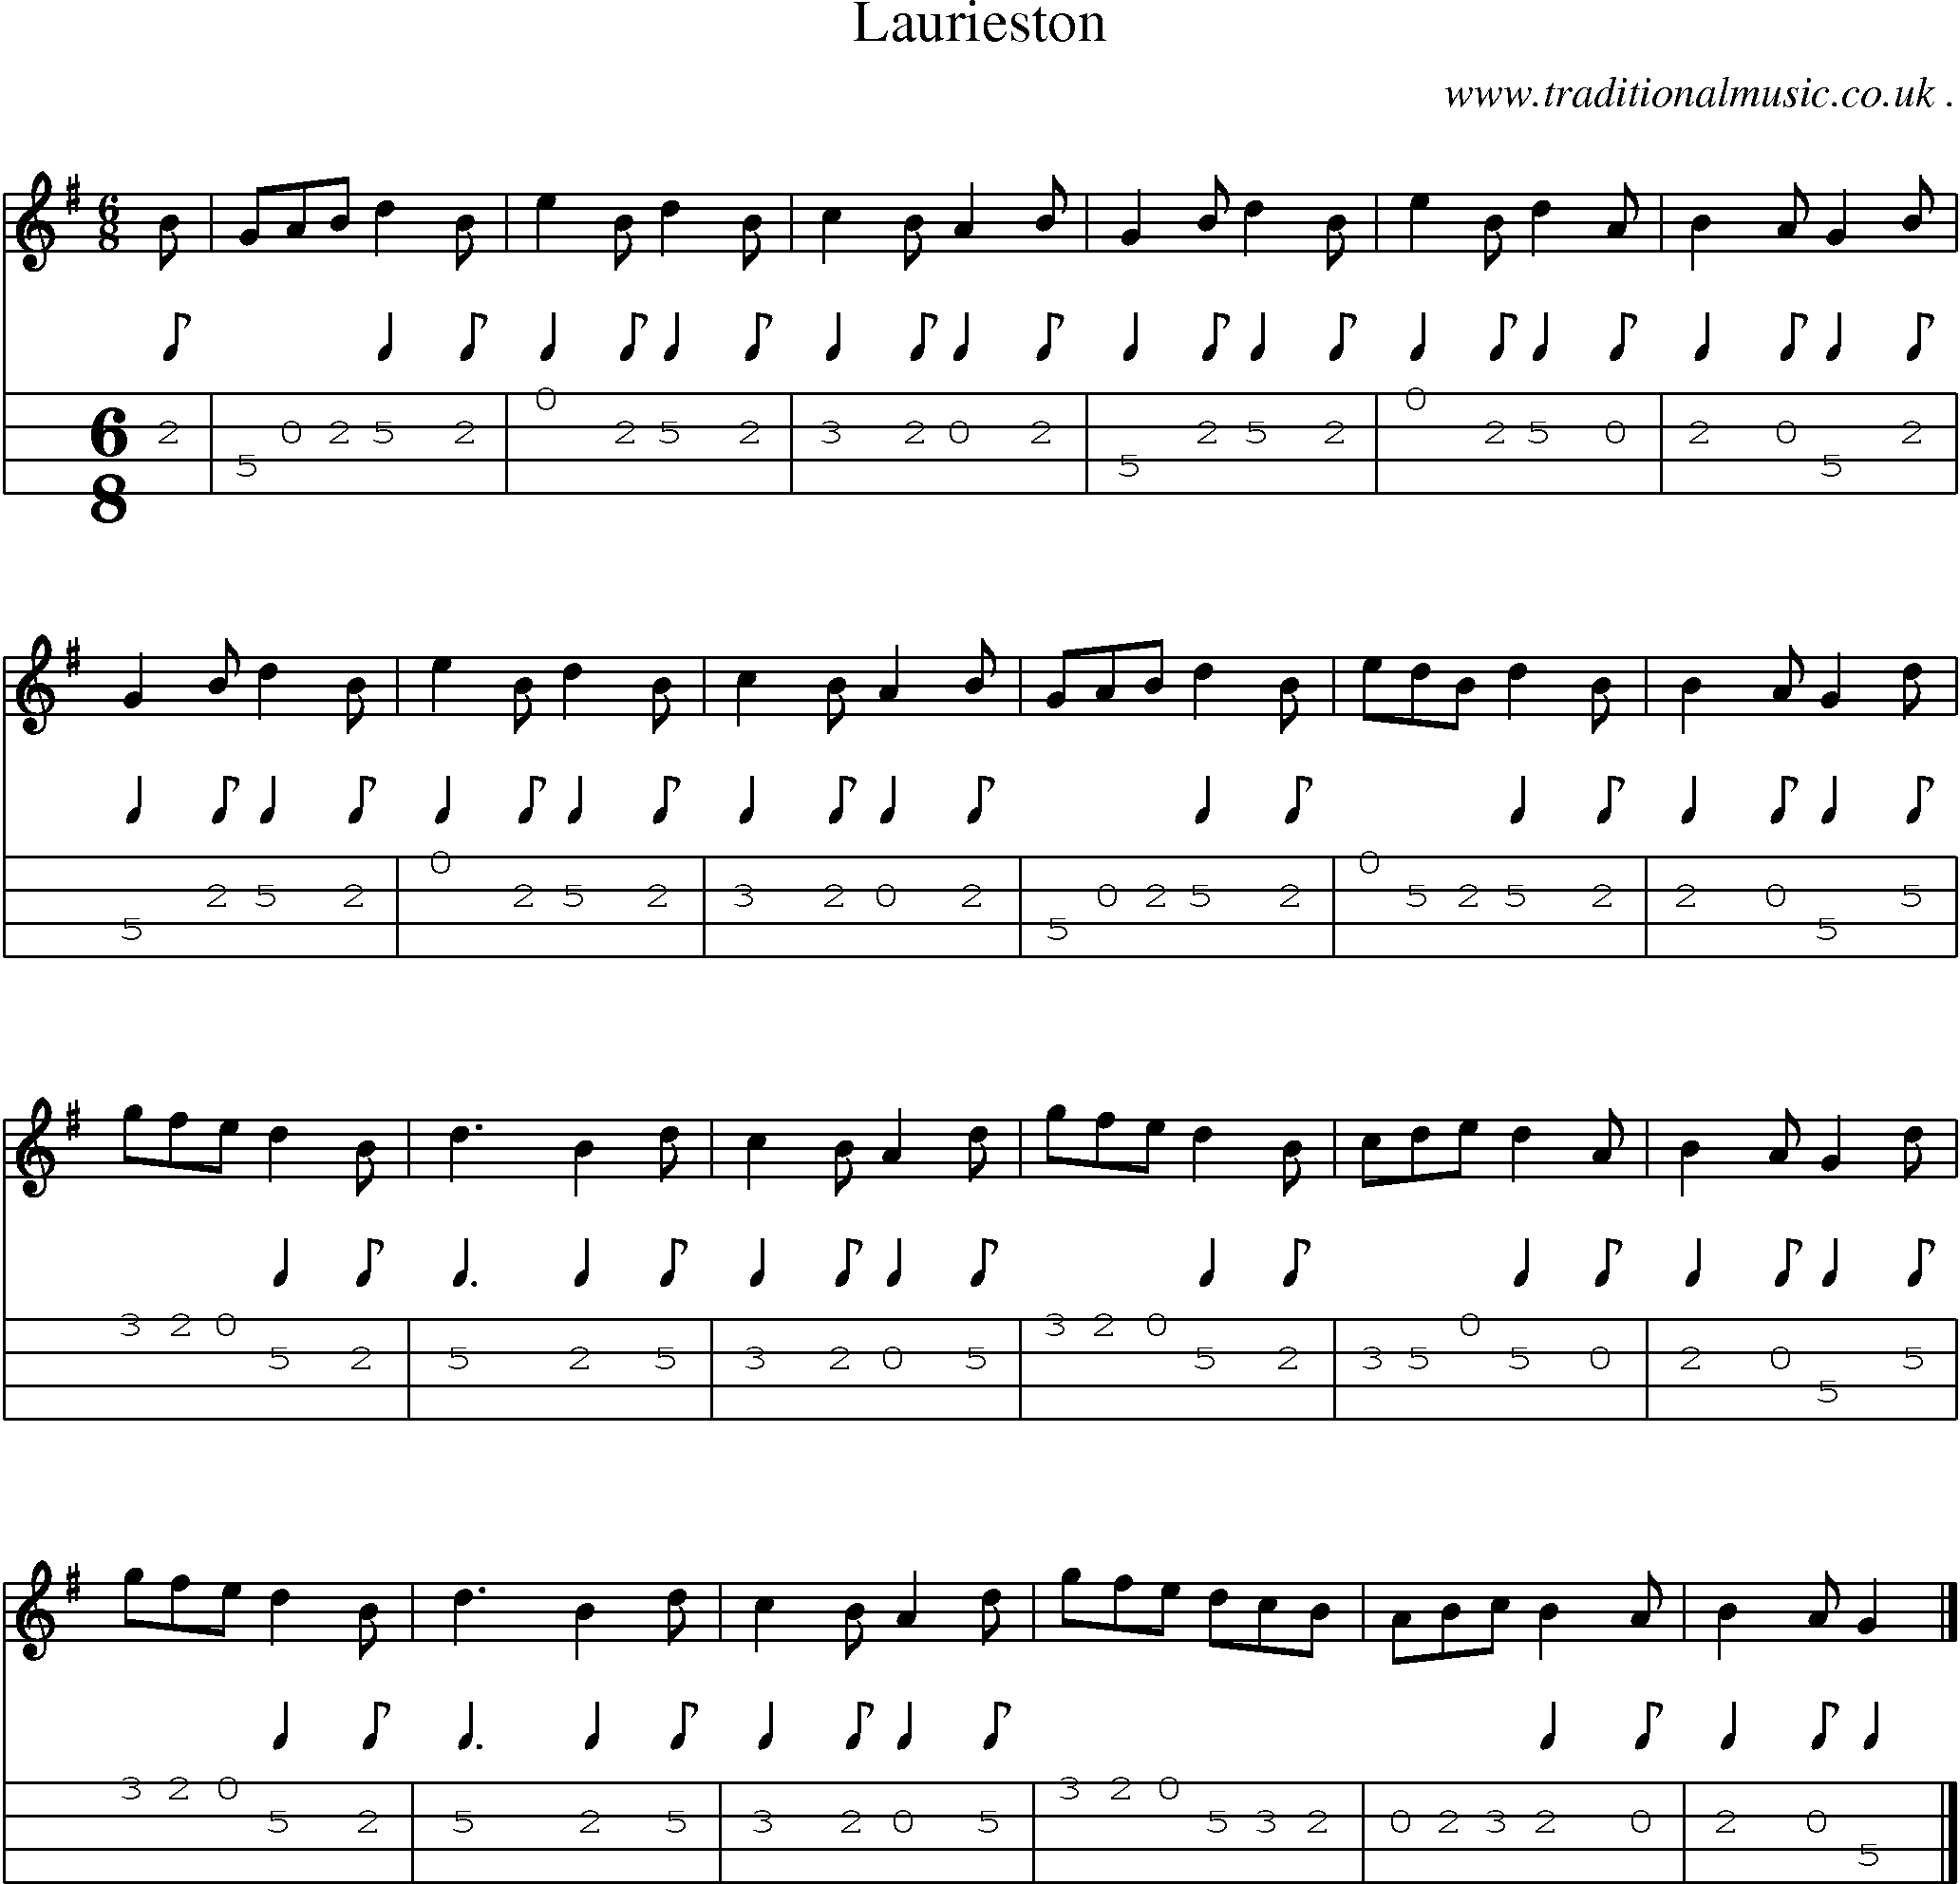 Sheet-music  score, Chords and Mandolin Tabs for Laurieston